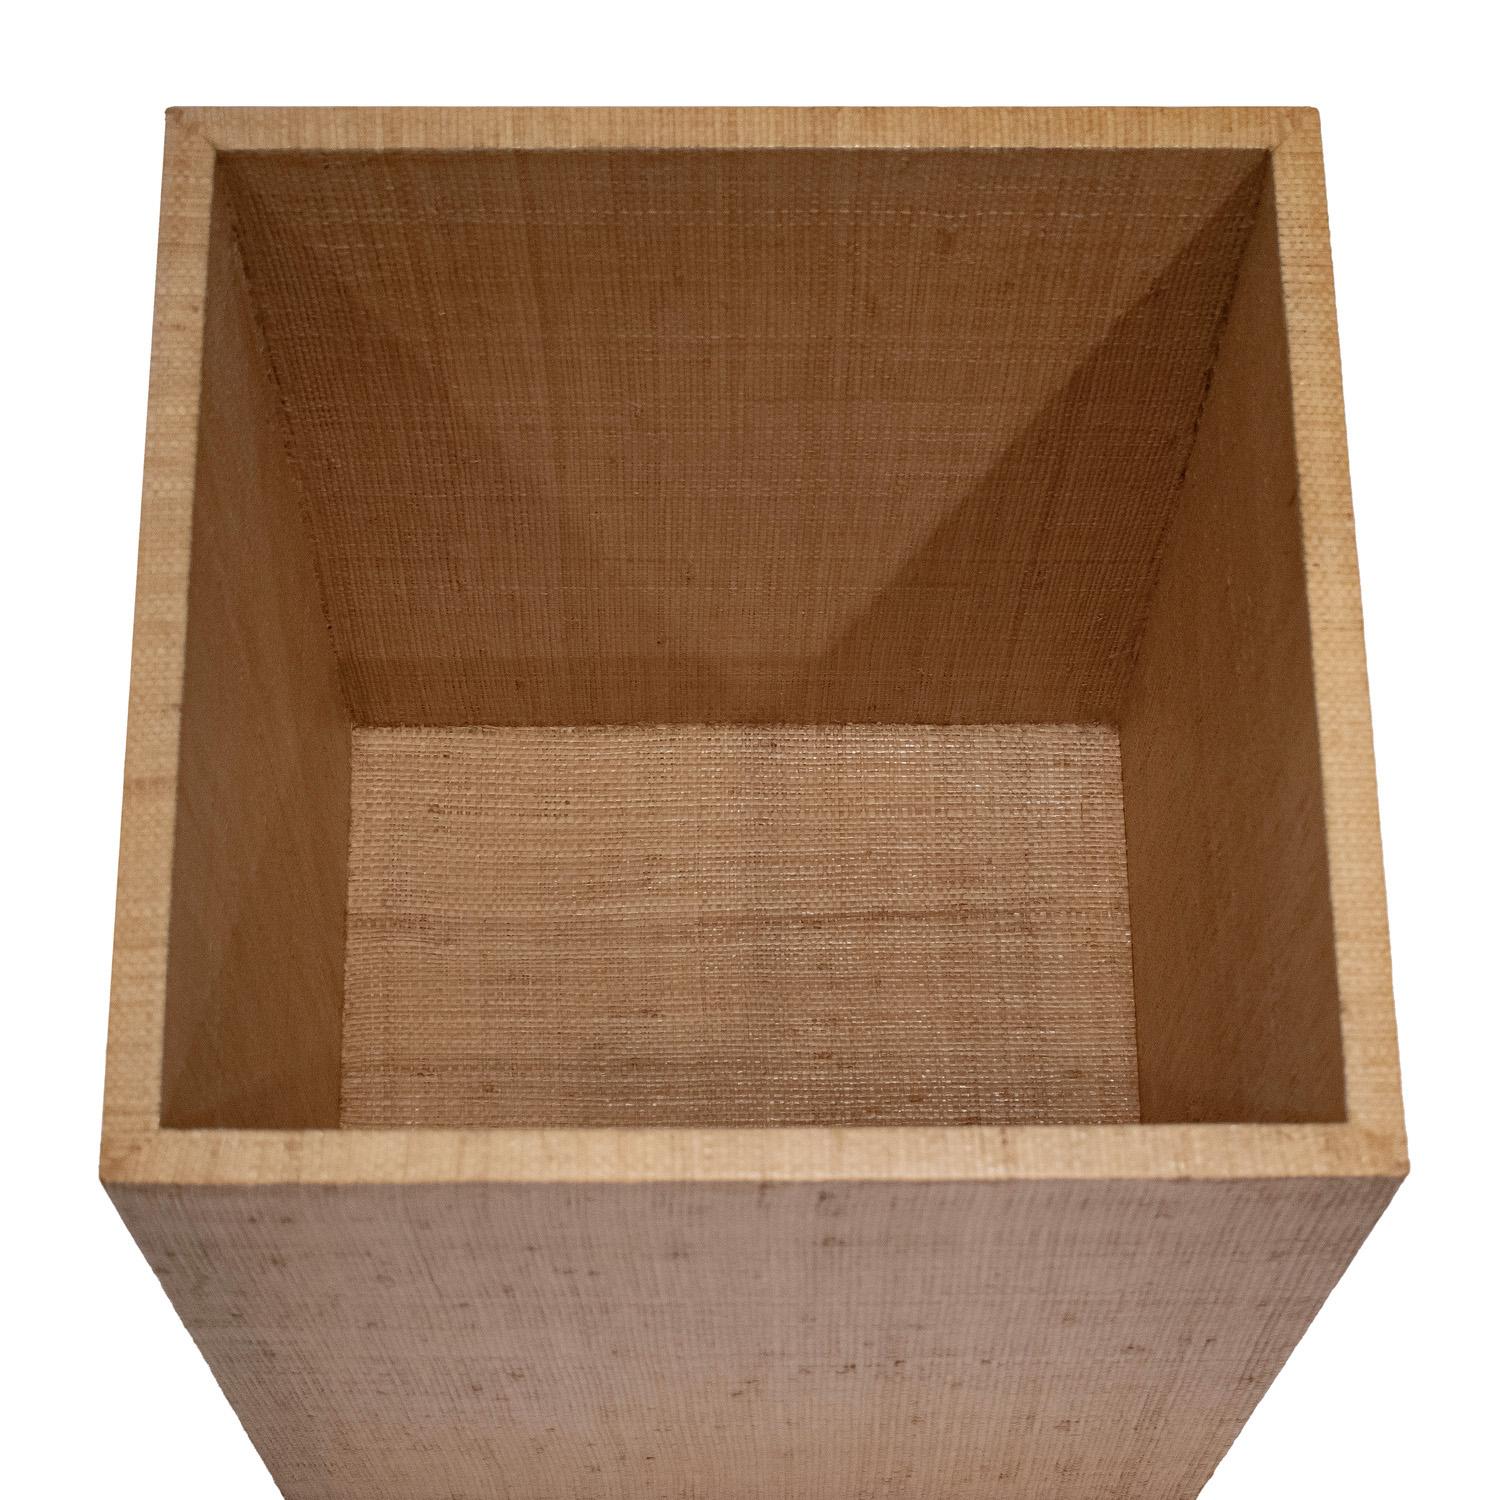 Hand-Crafted Karl Springer Prototype Box Table with Tray Top in Grasscloth 1976-1978 For Sale